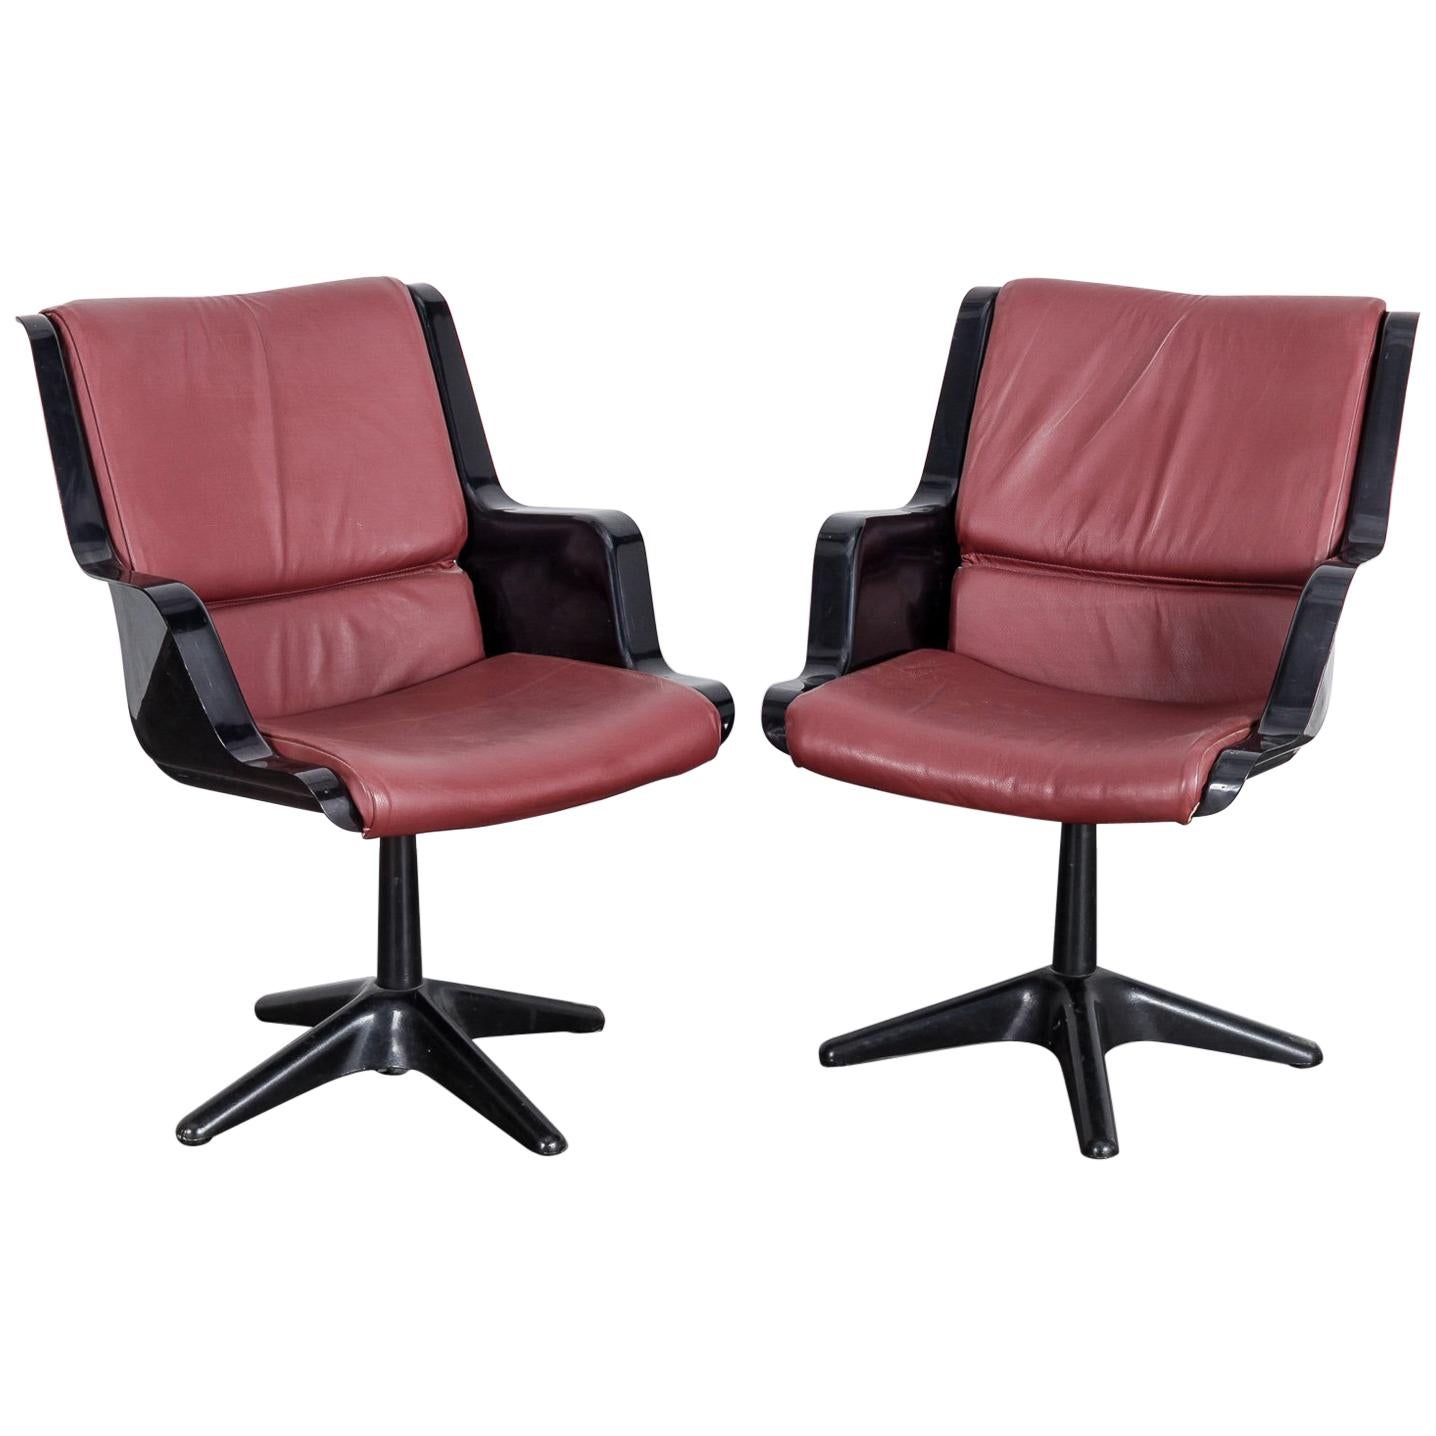 Pair of Yrjo Kukkapuro for Haimi Molded Plastic and Leather Swivel Side Chairs For Sale